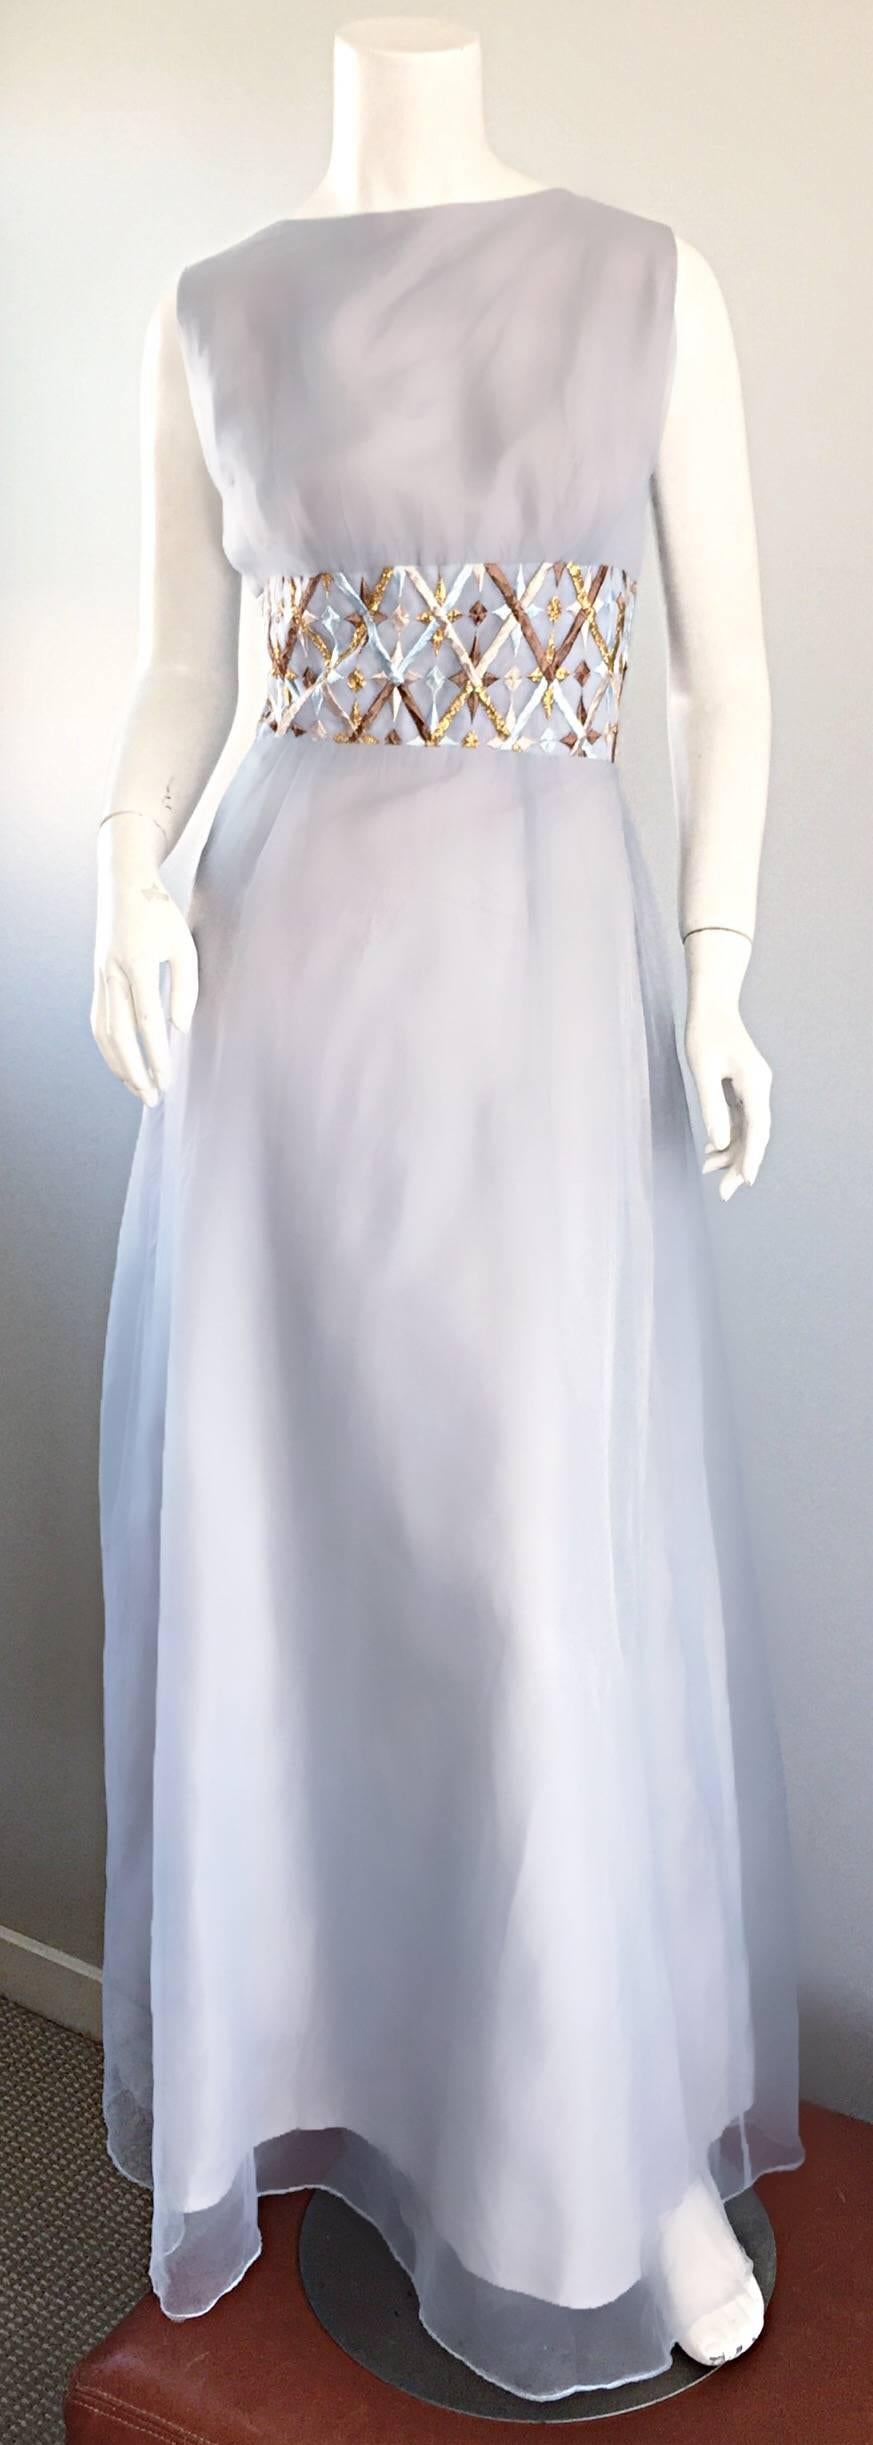 Sensational 1960s MELBRAY OF LONDON light blue silk and chiffon gown! Couture quality, with heavy attention to detail. Features a flattering gold, silver and blue hand embroidered waistband. Pale blue silk underlay with an attached pale blue chiffon